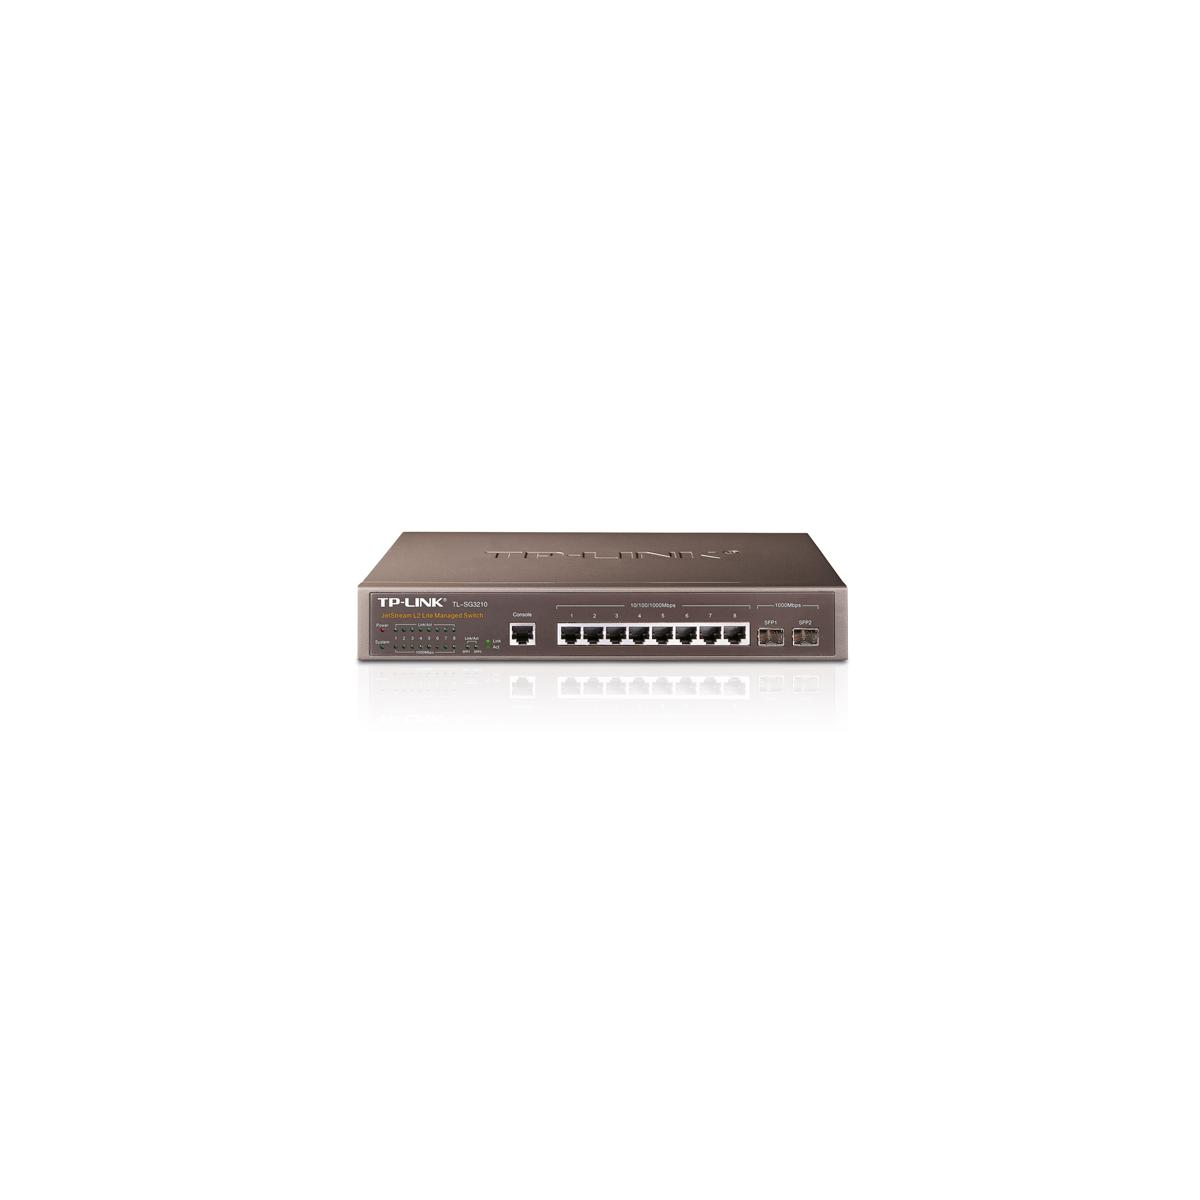 TL-SG3210 11 Switch TP-LINK